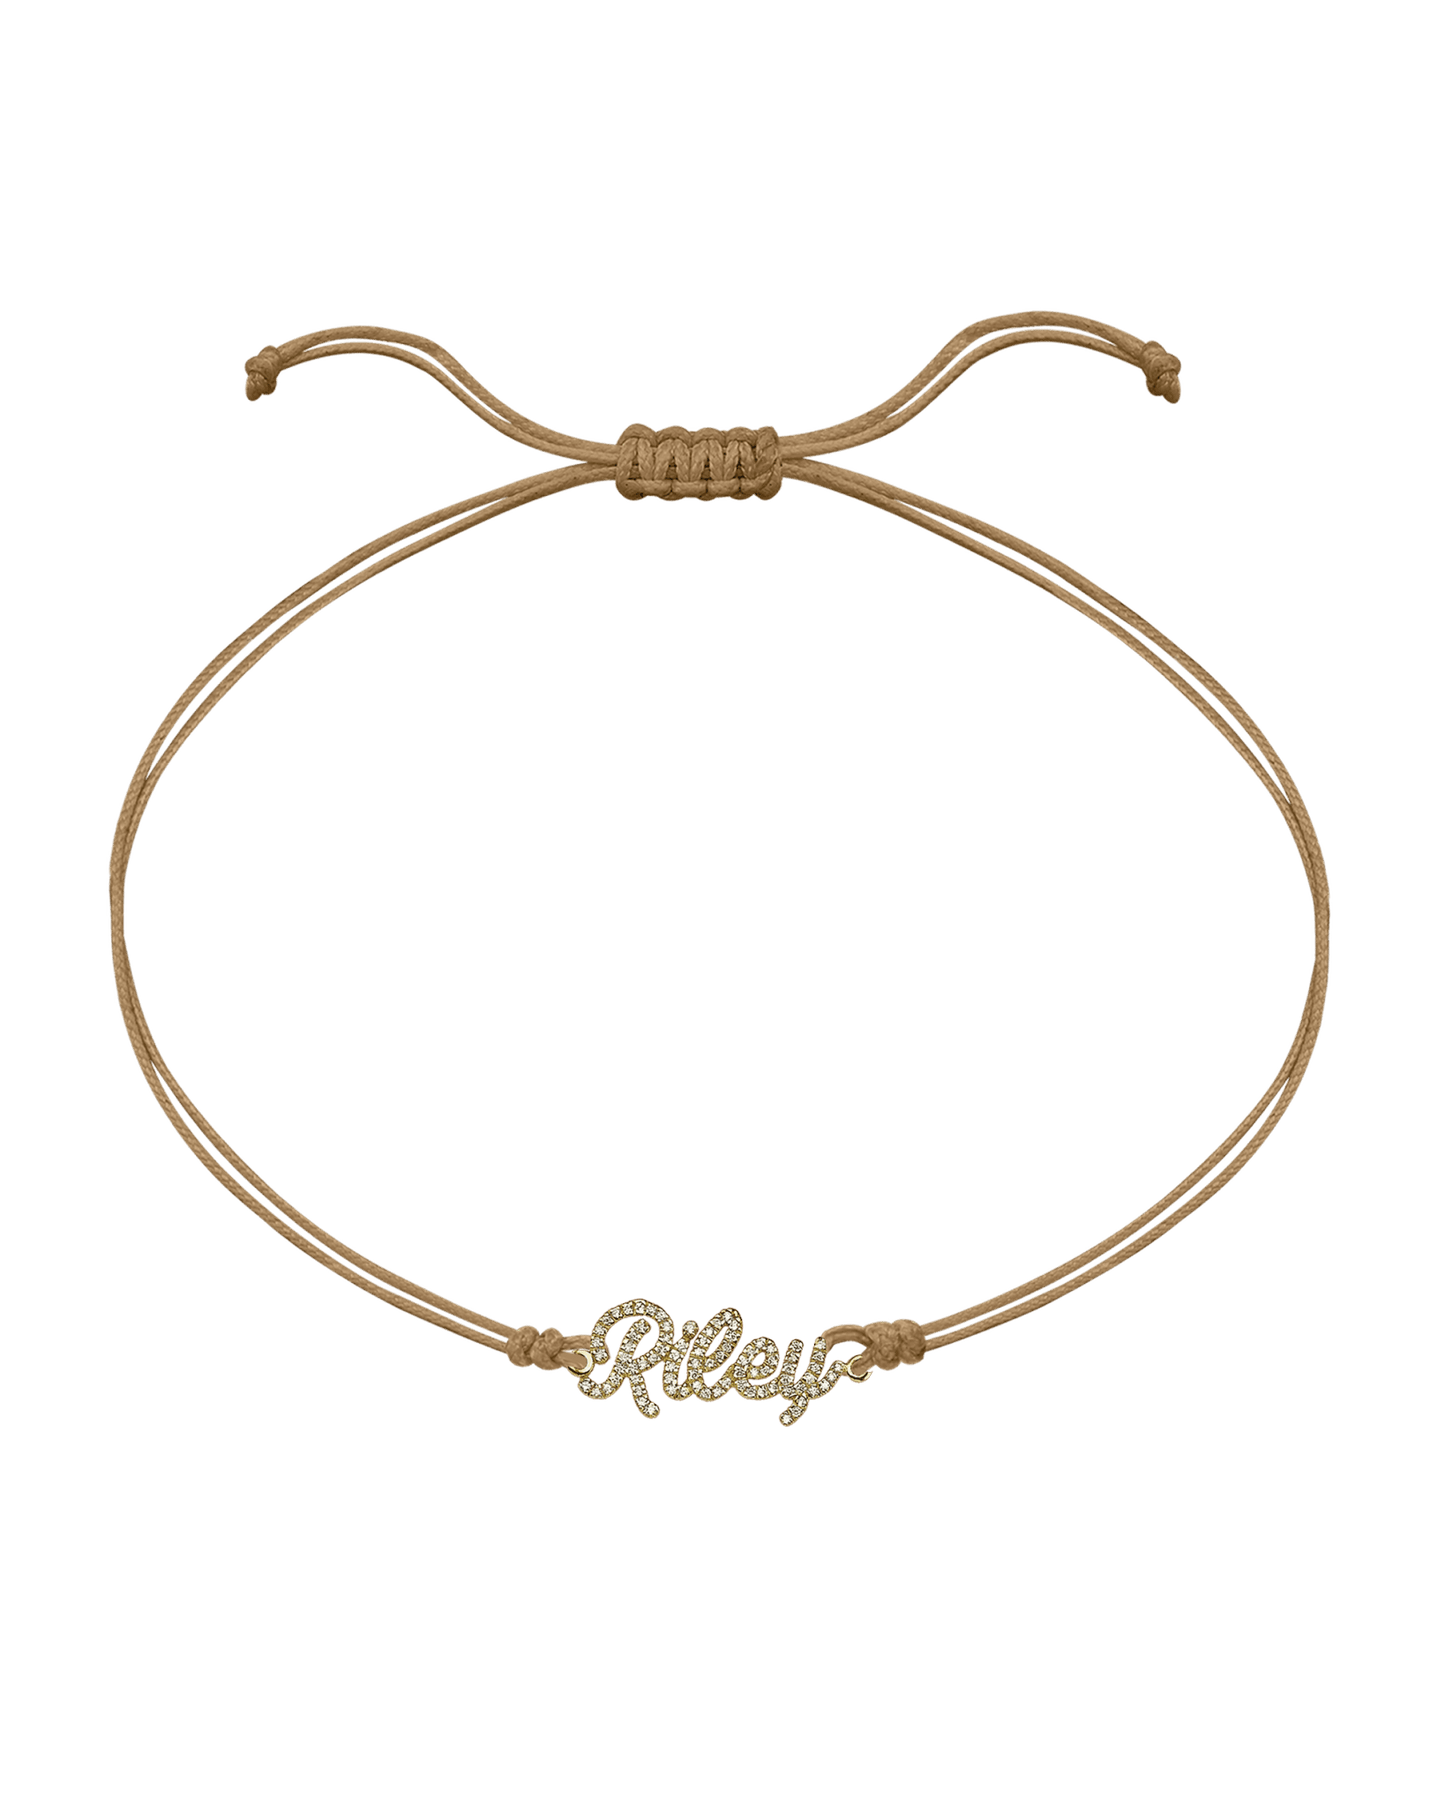 Paved Name Plate String of Love - 14K Yellow Gold Bracelet 14K Solid Gold Camel 1 